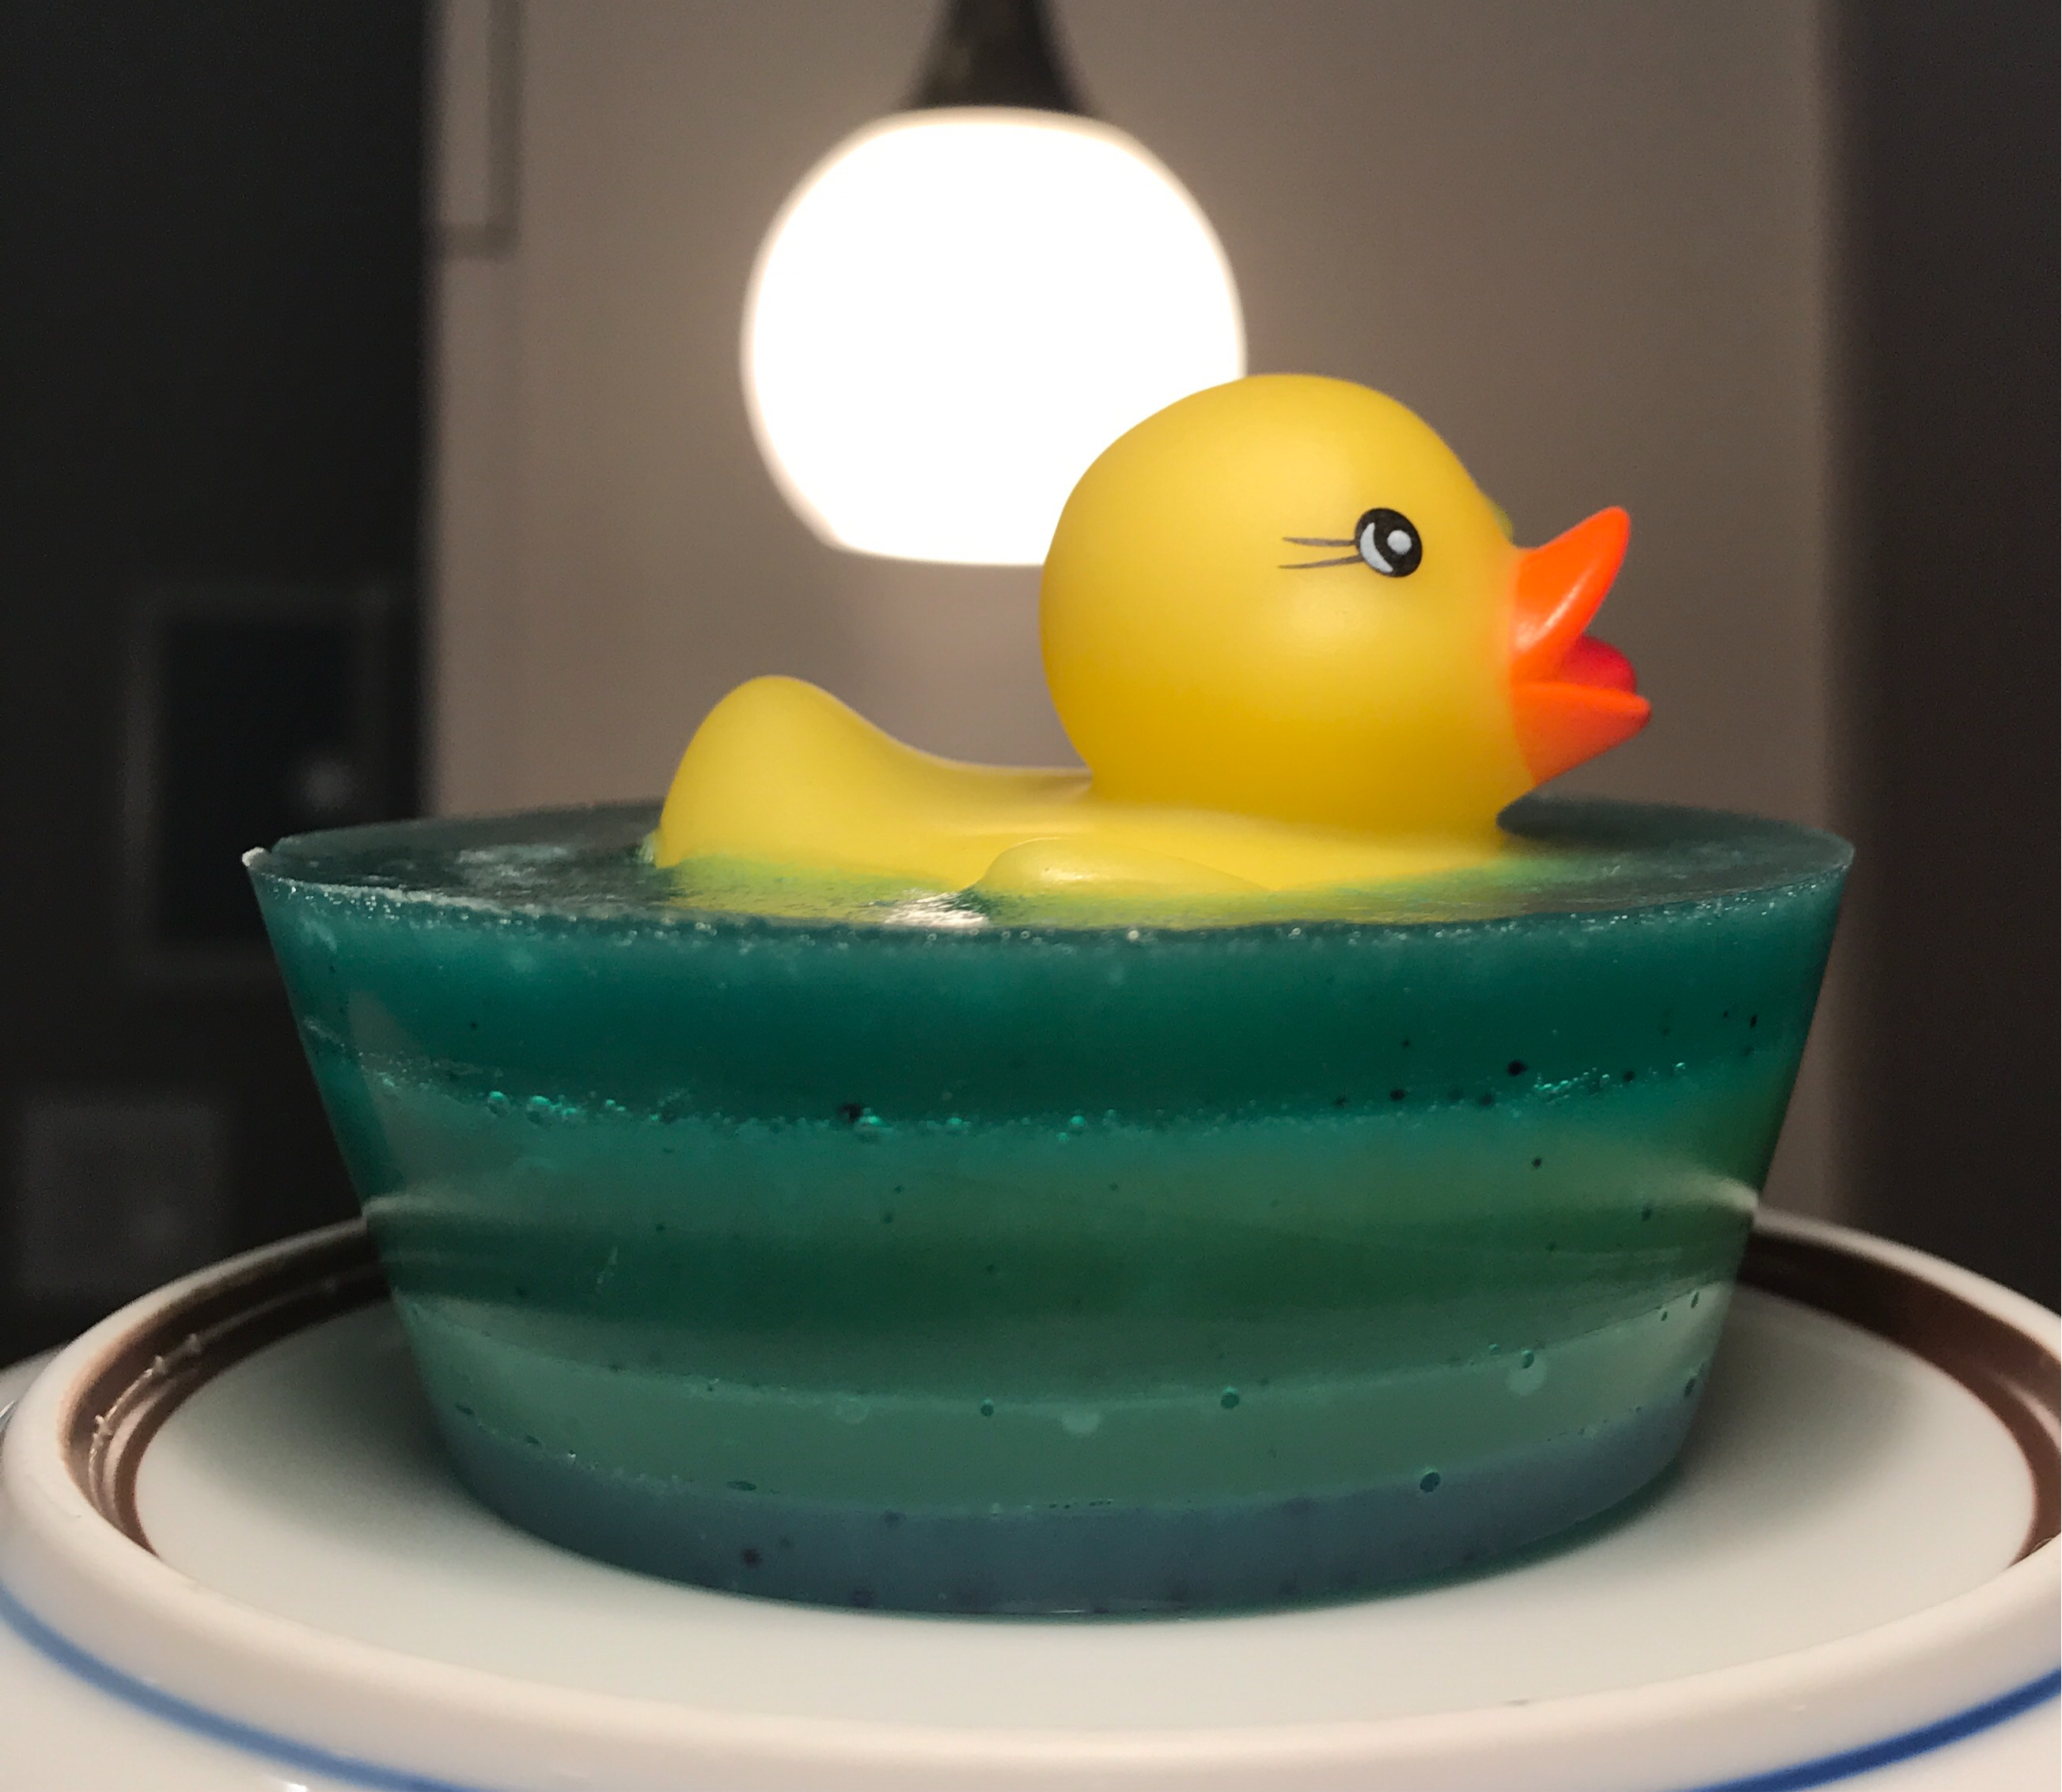 HUMAN MADE RUBBER DUCK 全種(3種) コンプリートセット